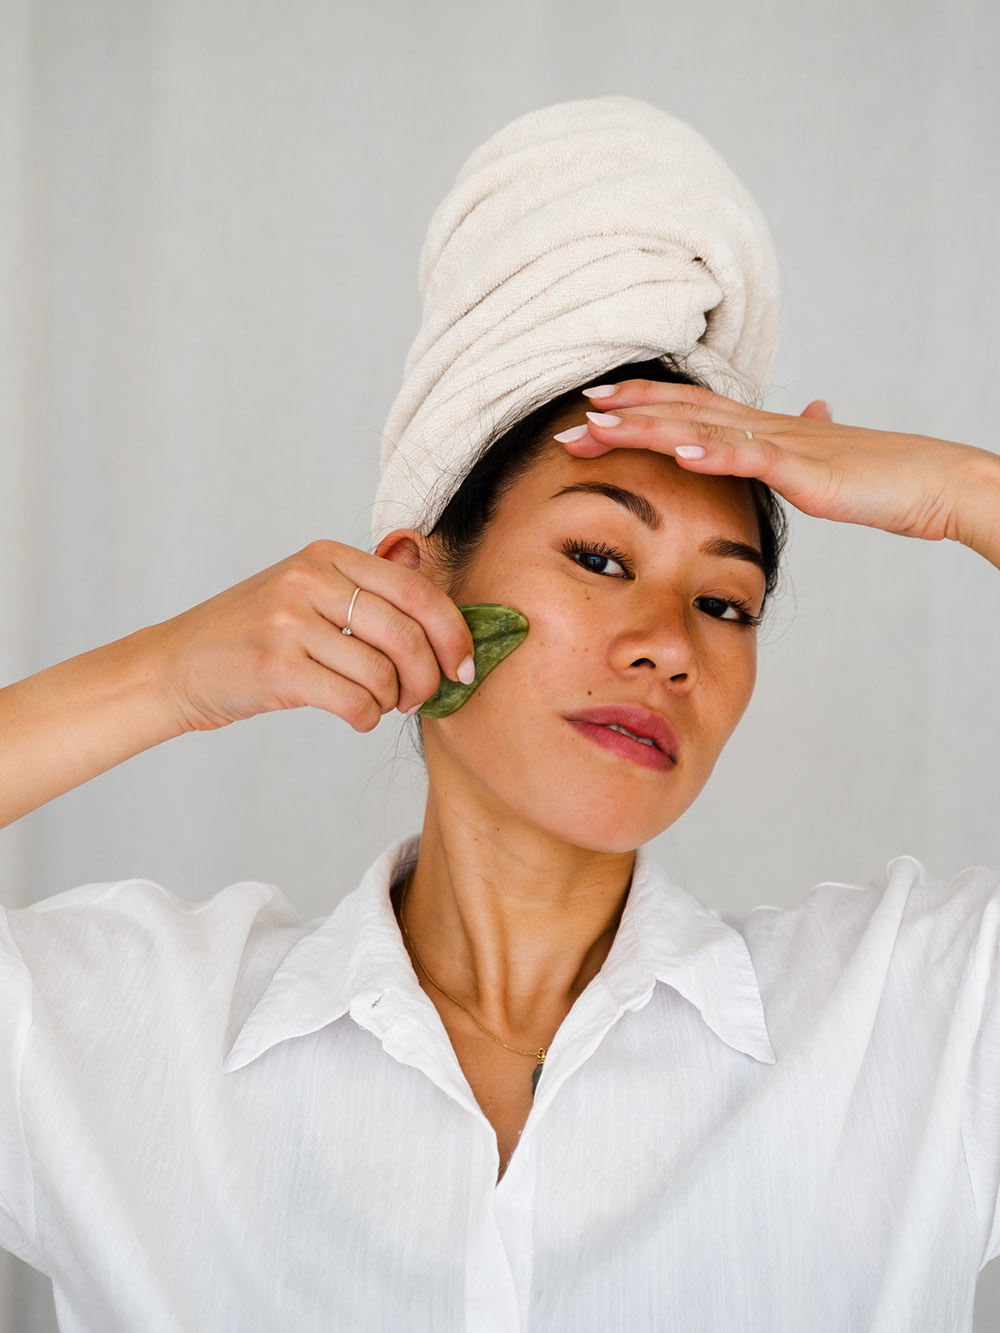 How to Naturally Tighten Skin, According to Experts